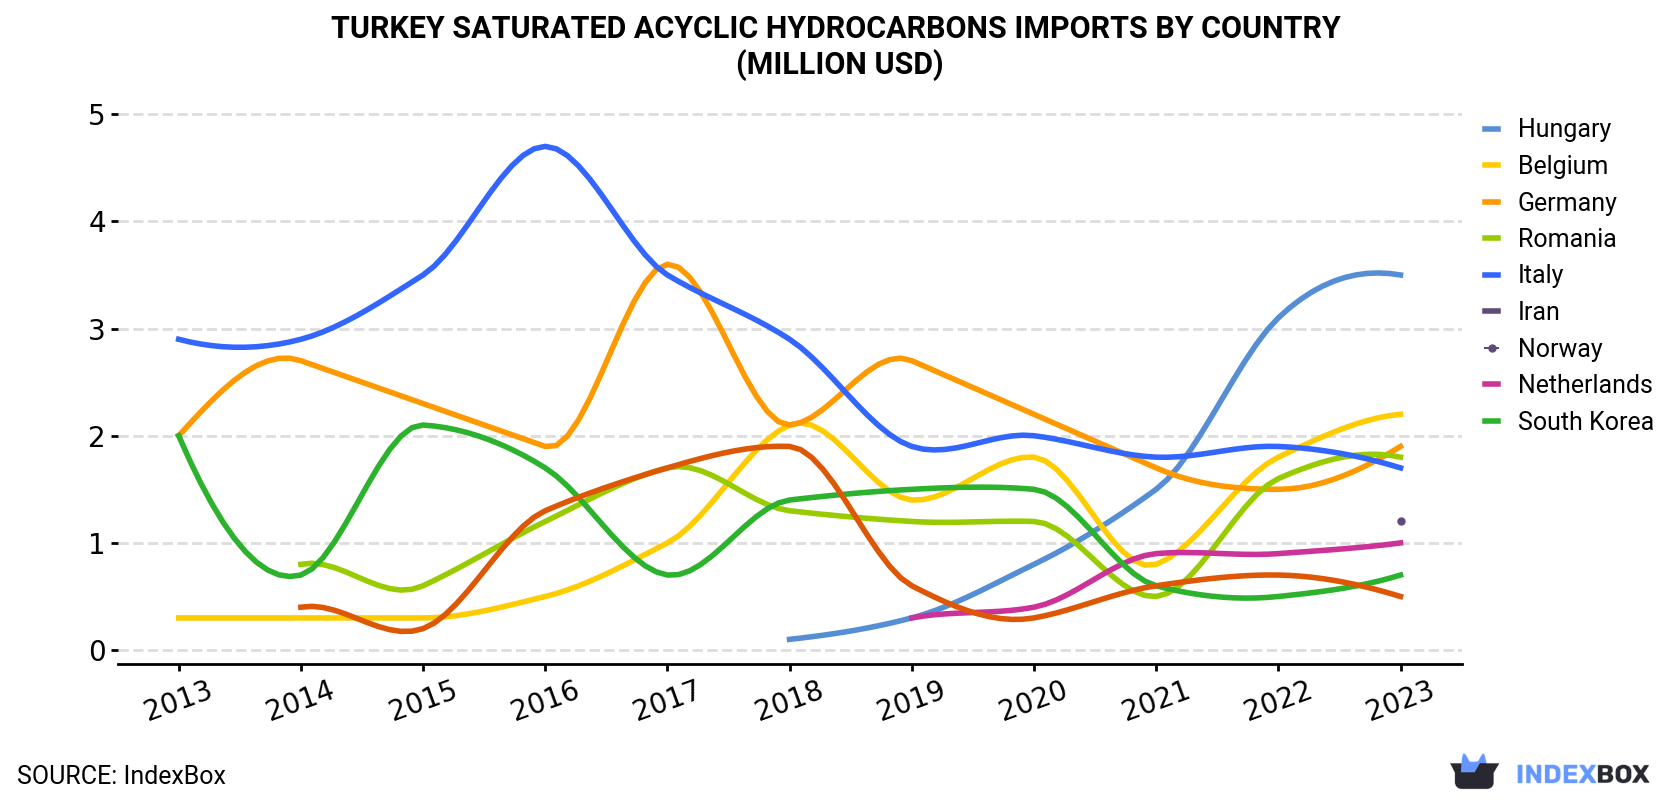 Turkey Saturated Acyclic Hydrocarbons Imports By Country (Million USD)